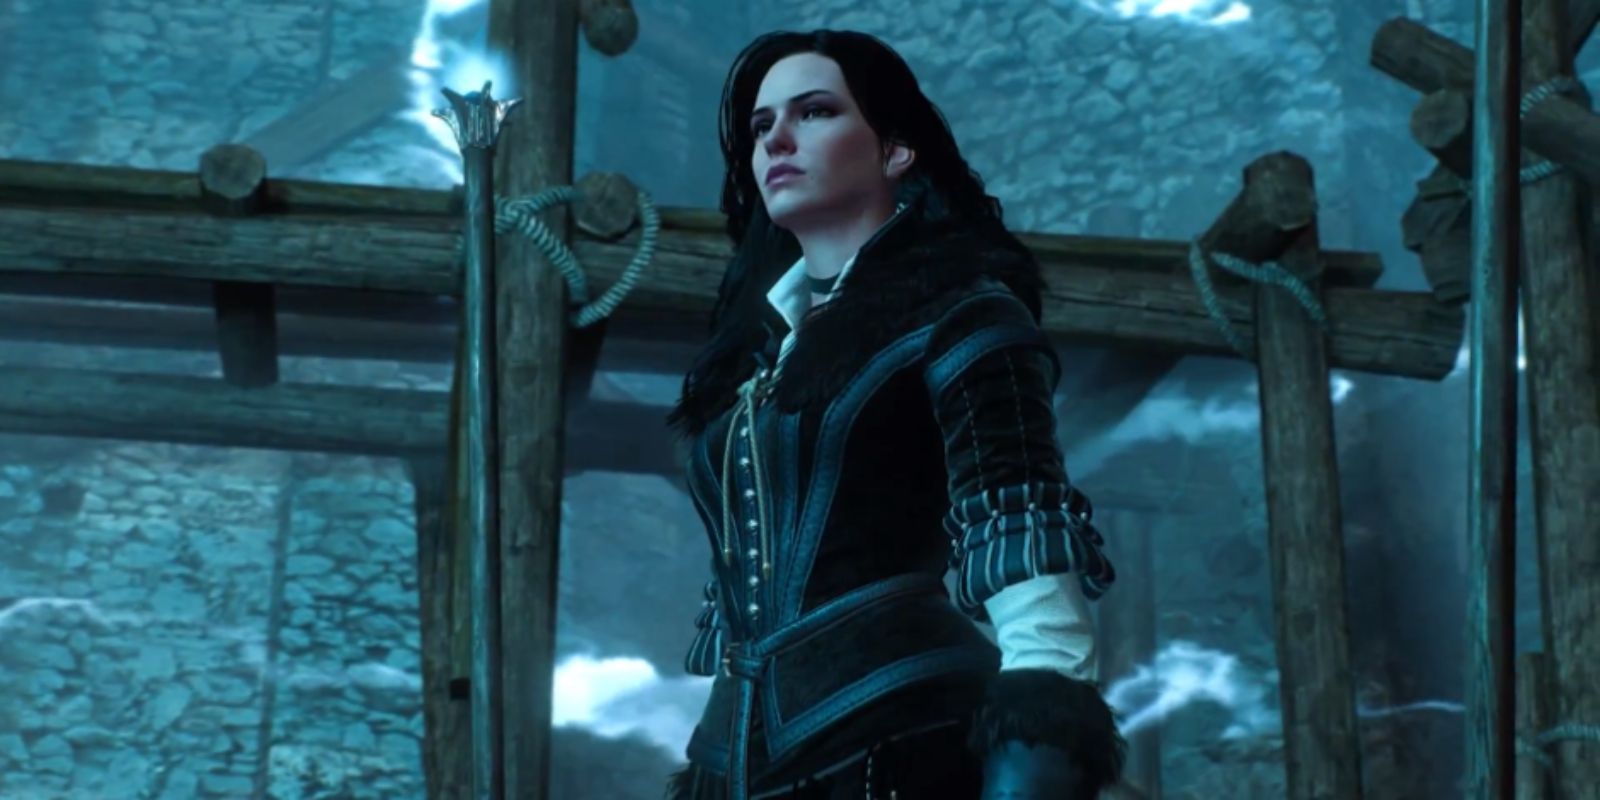 Yennefer at Kaer Morhen in The Witcher 3